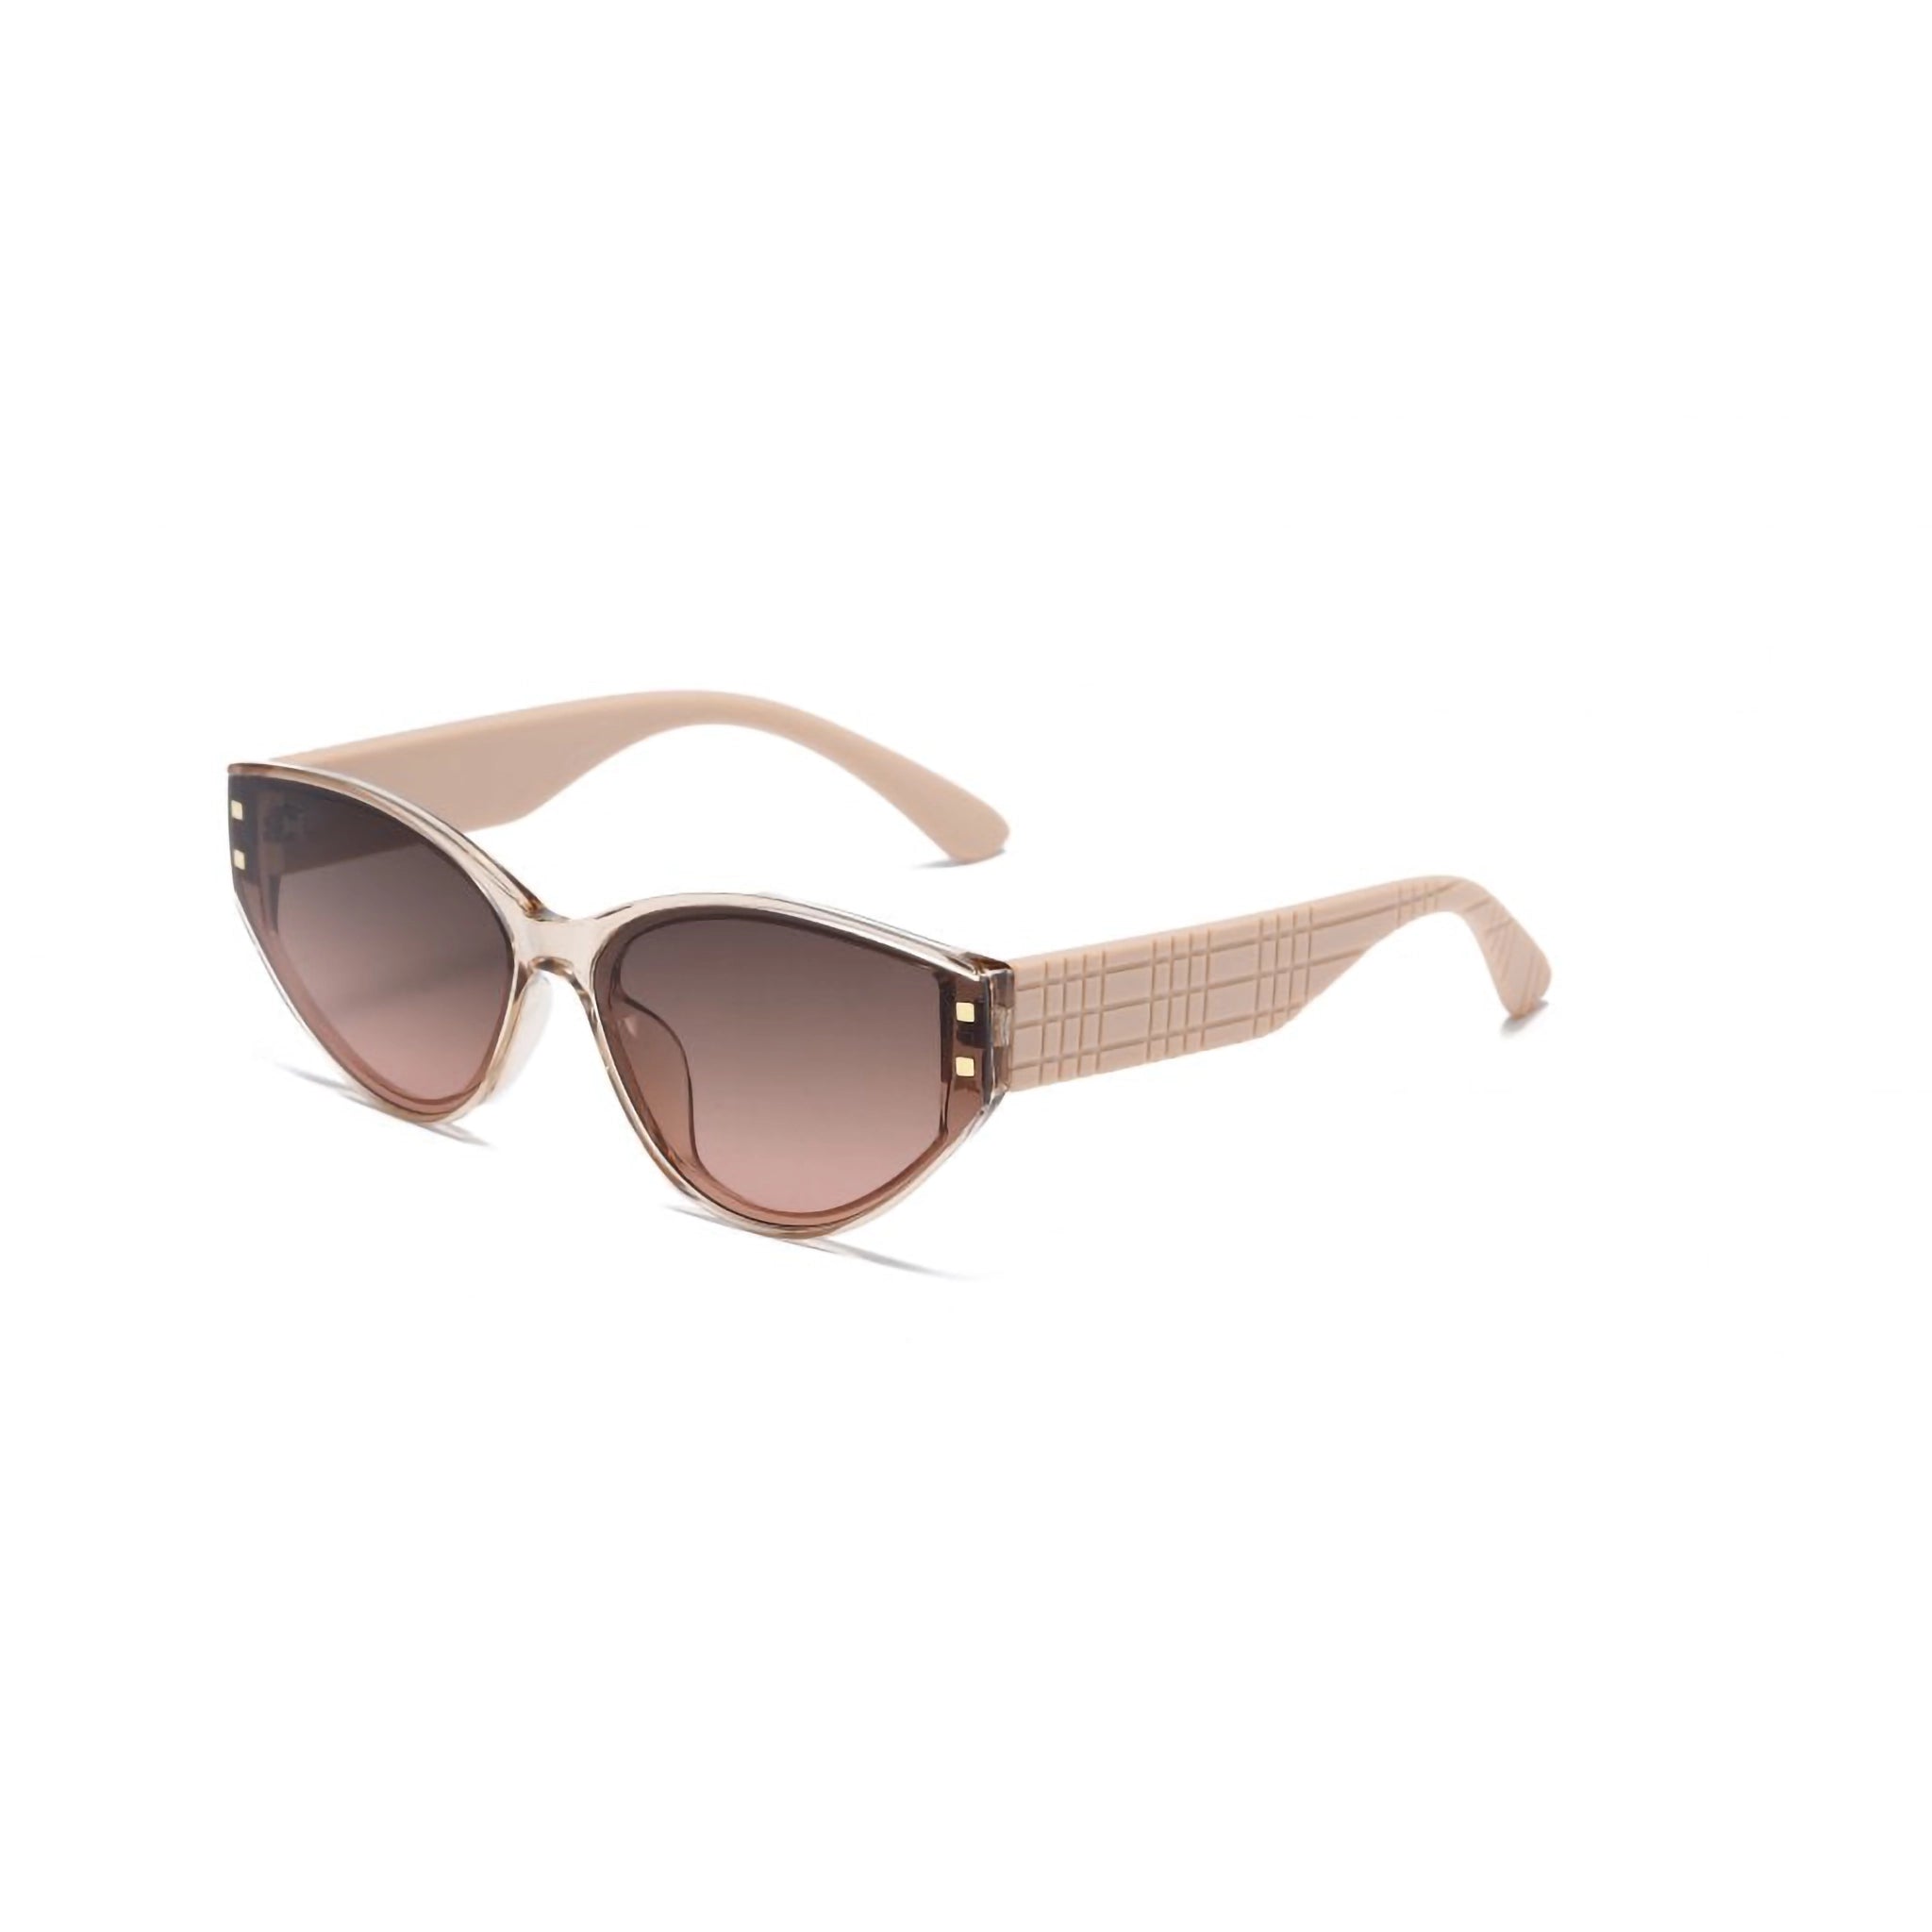 Cat eye sunglasses in a neutral colour with geometric hatch texture on the arms